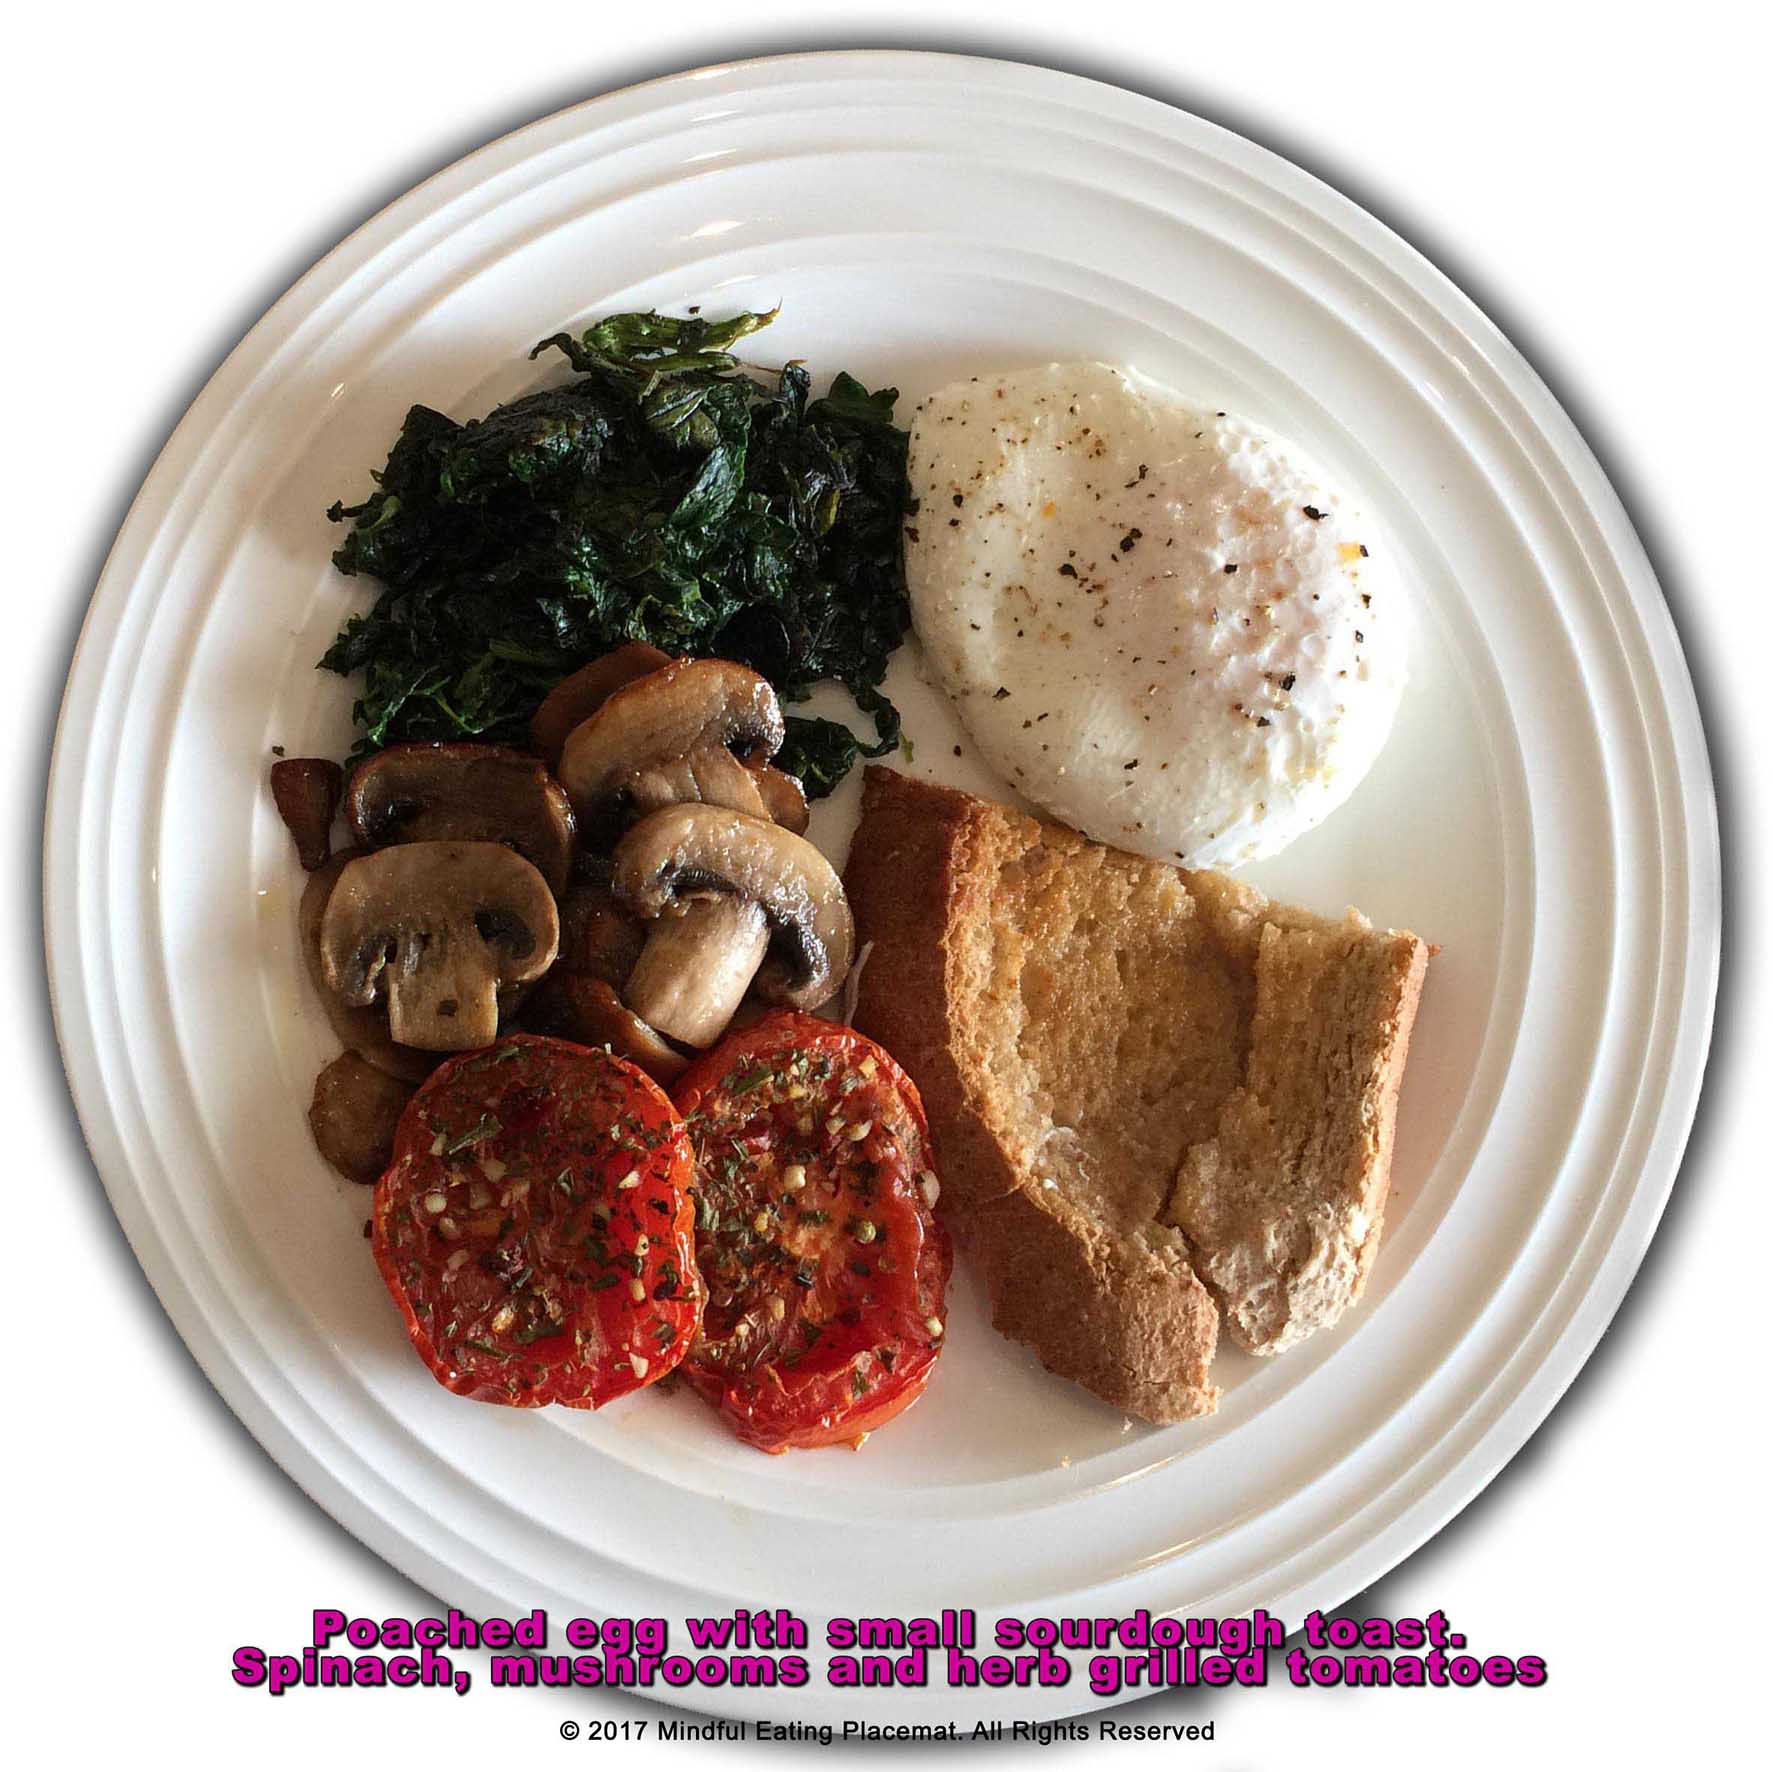 Poached egg with sourdough toast, grilled tomatoes, mushrooms and spinach